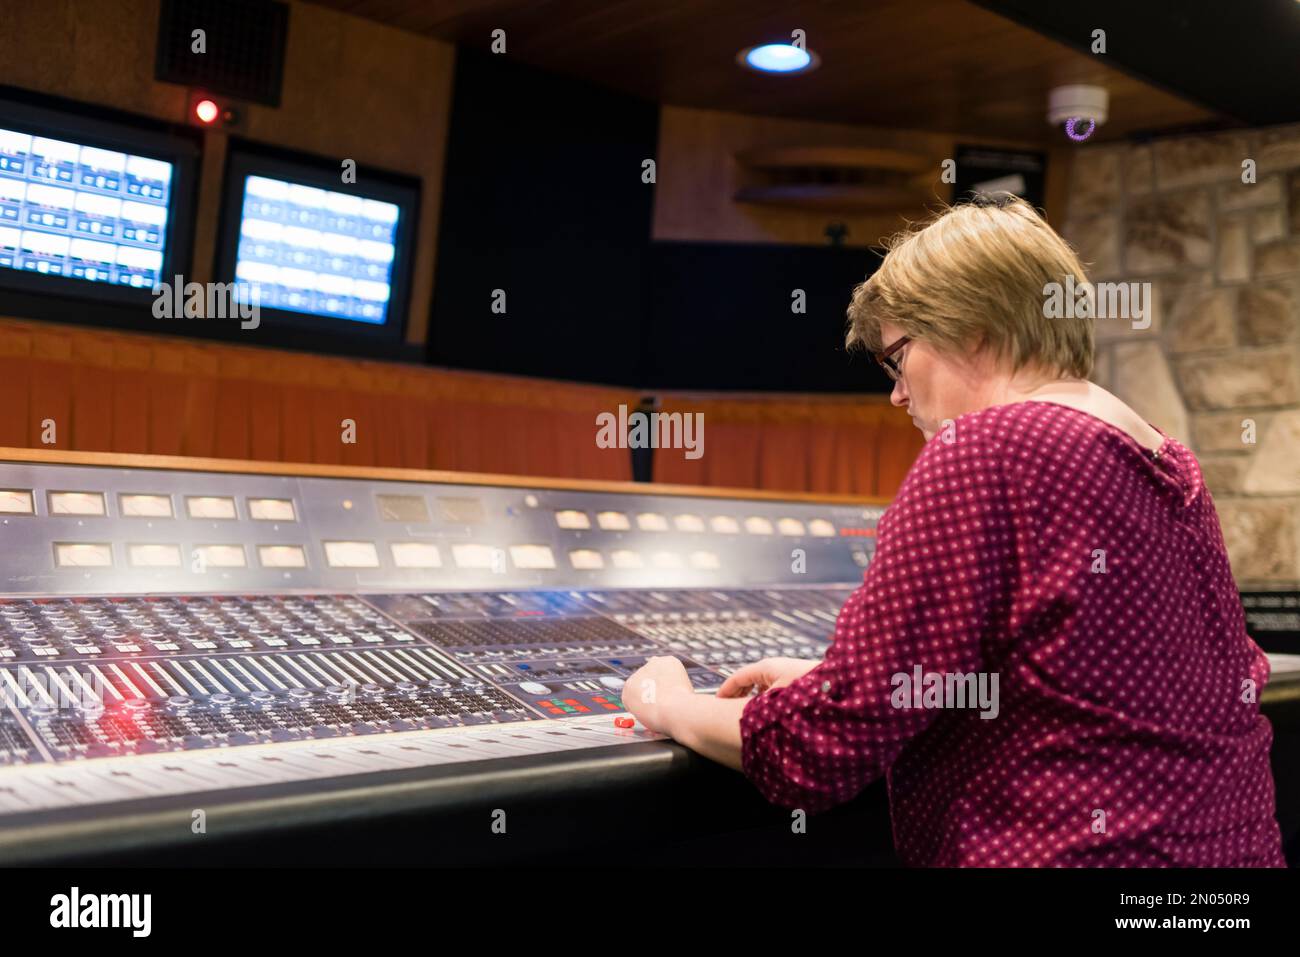 A woman is sitting in a professional analog vintage audio recording studio. Picture taken at the Mountain View Studio at Montreux, Switzerland. Stock Photo